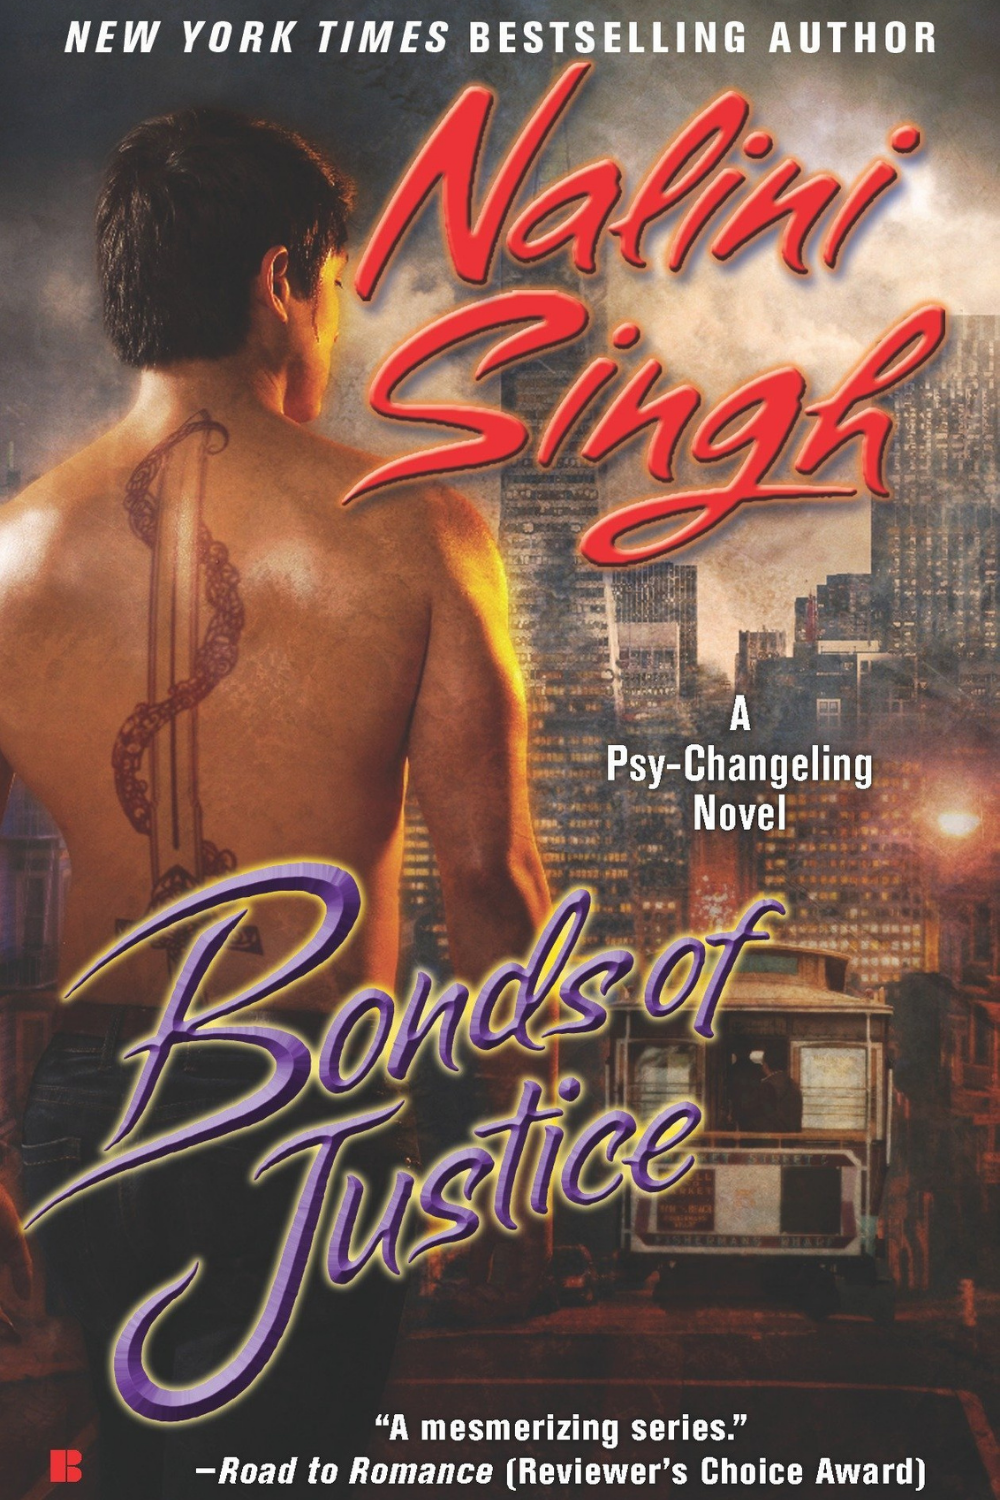 S2 E18 Bonds of Justice by Nalini Singh